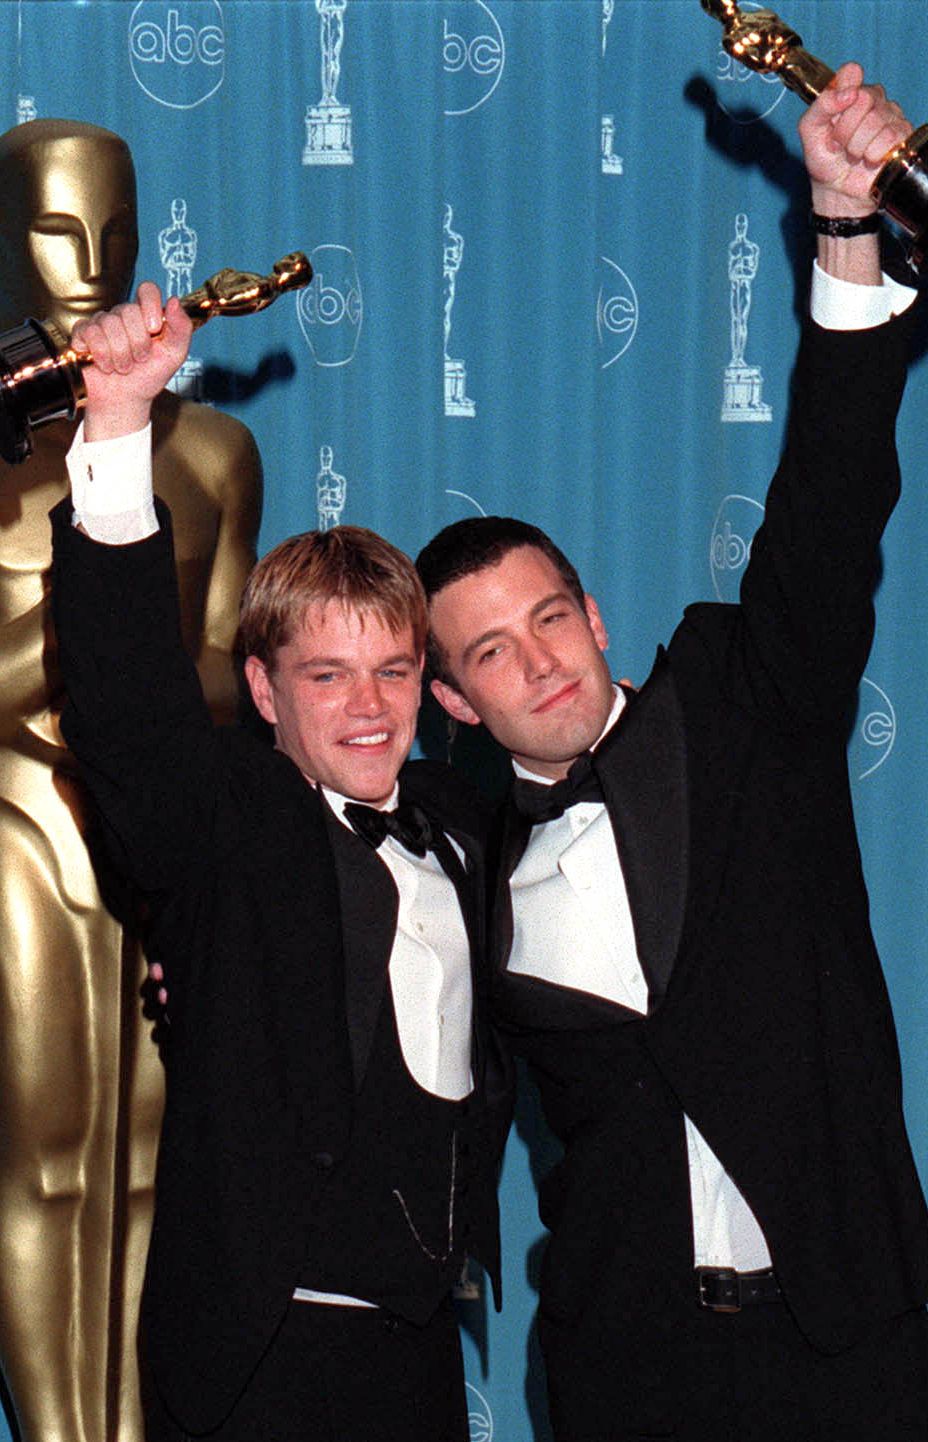 Matt Damon and Ben Affleck at the 1998 Oscars, where they won the Best Original Screenplay award for Good Will Hunting